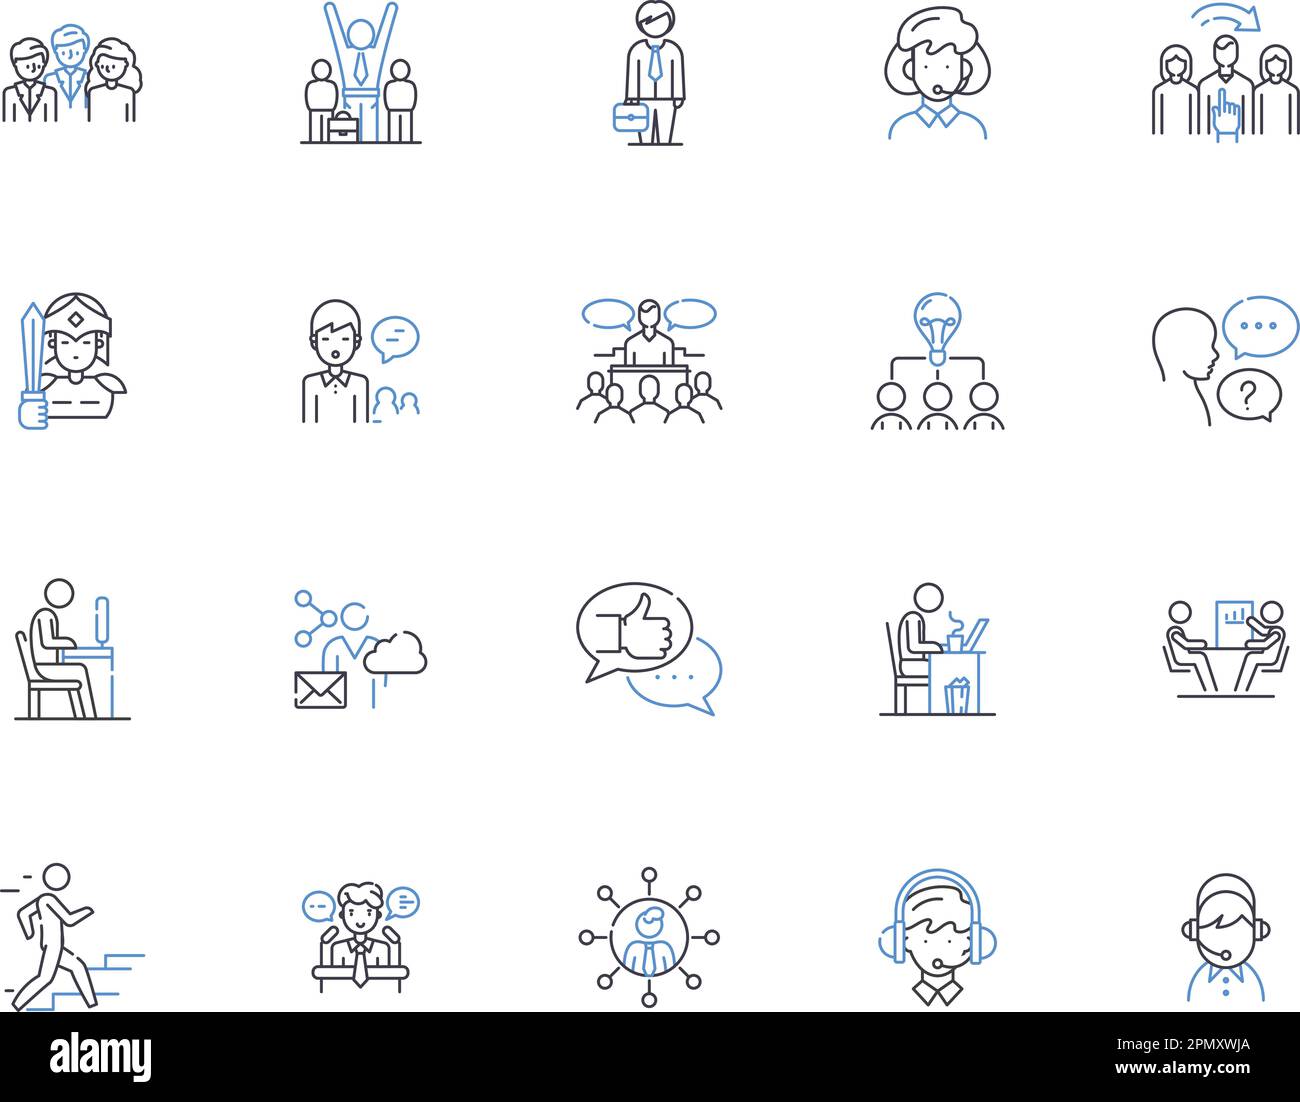 Empoyee outline icons collection. Employee, Staff, Worker, Personel, Team, Member, Associate vector and illustration concept set. Colleague, Personnel Stock Vector